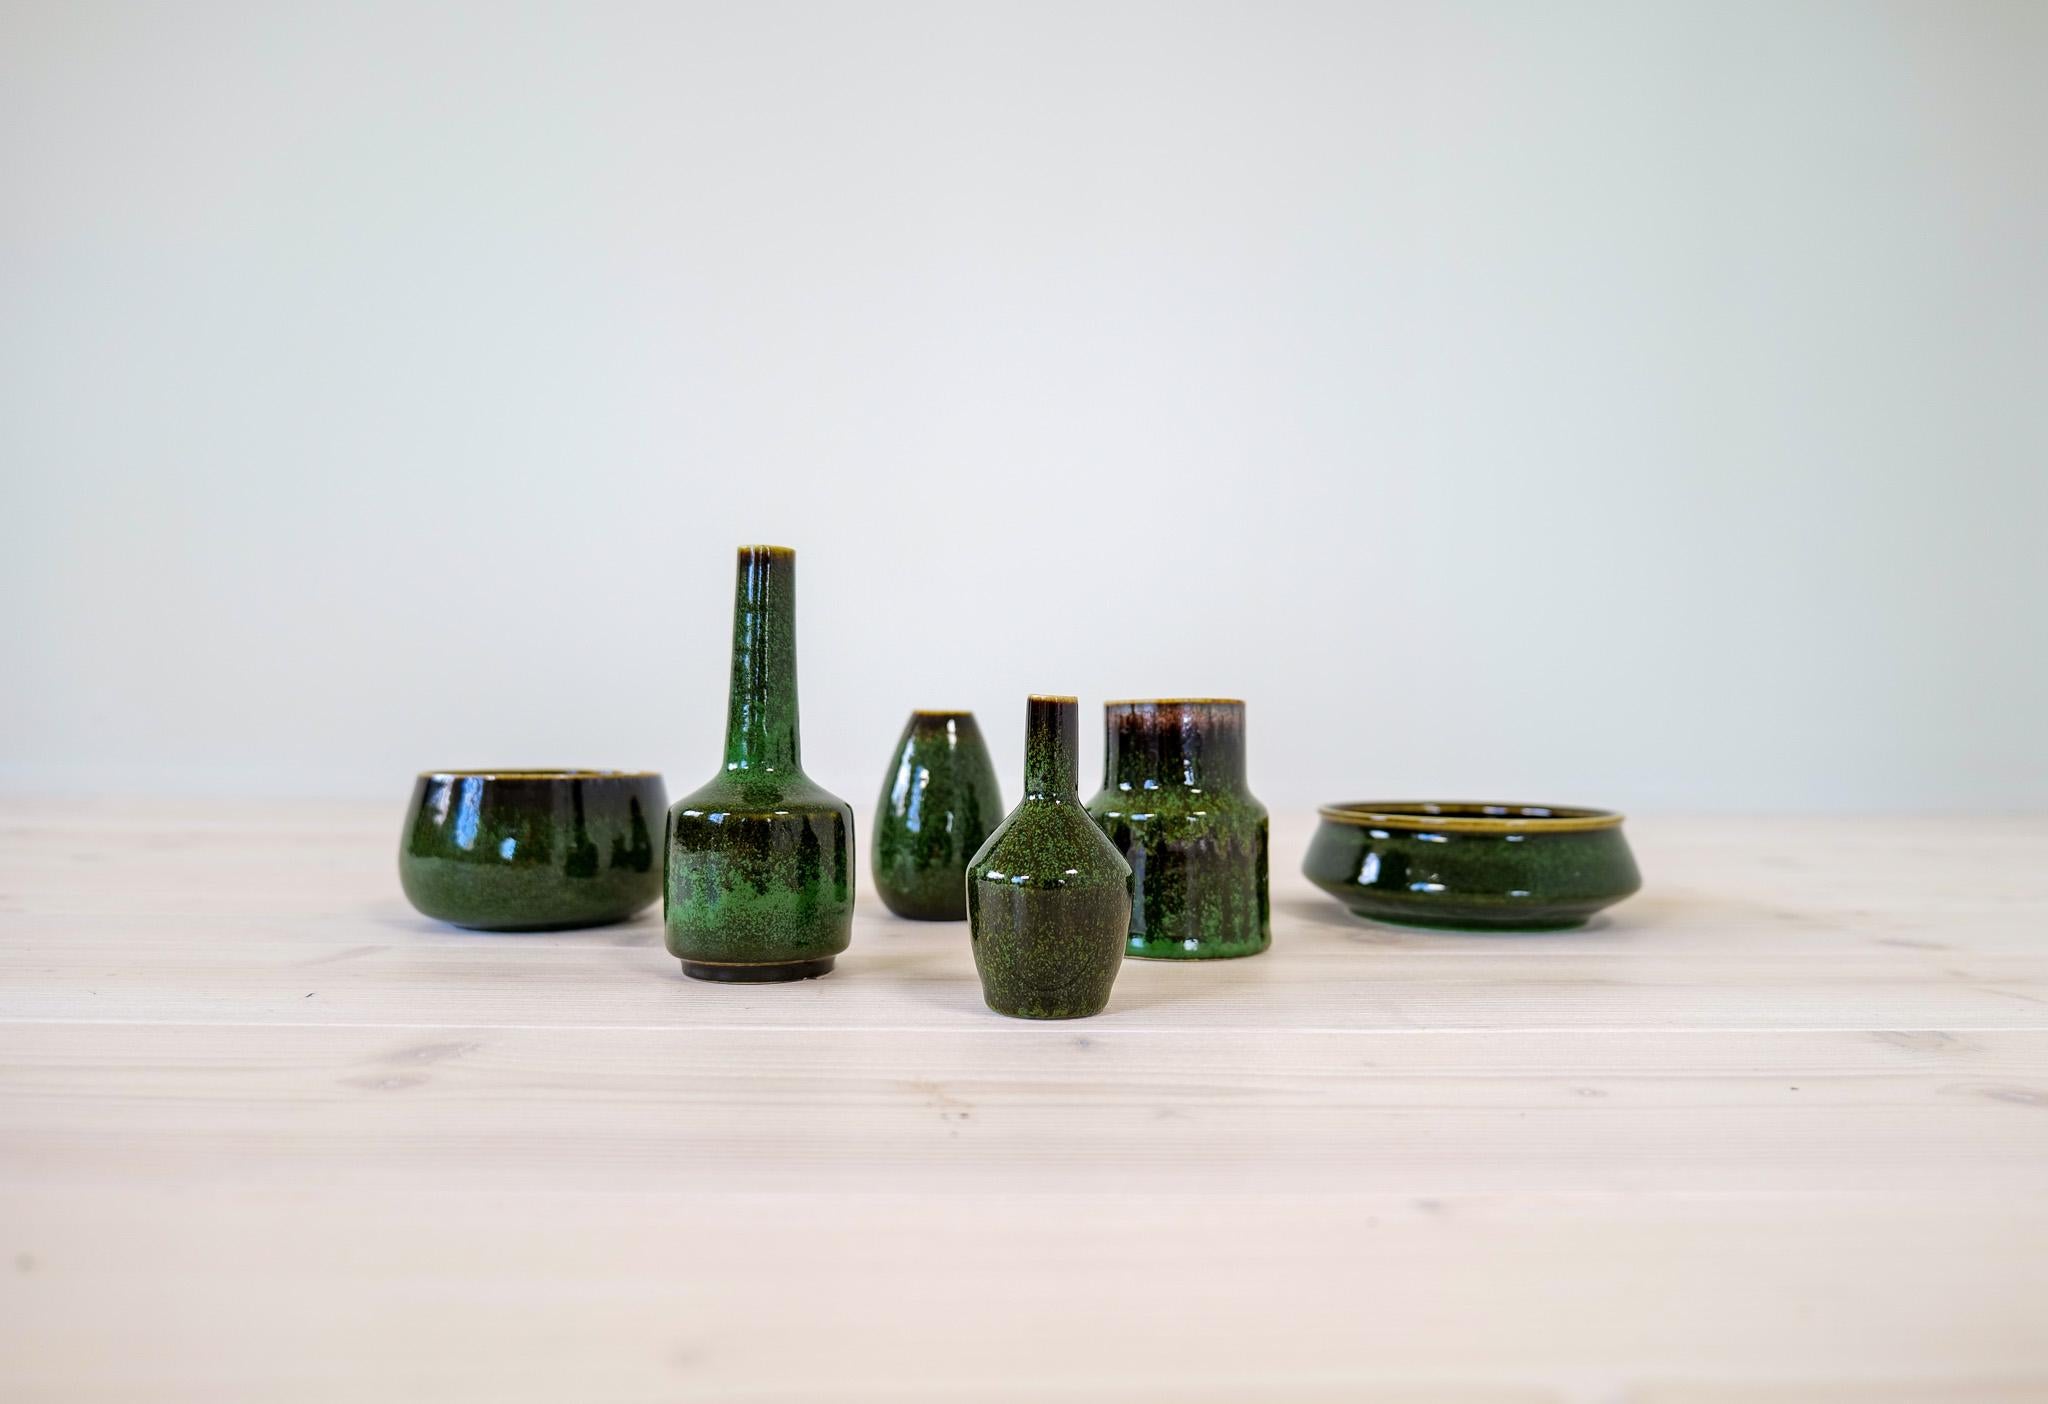 Collection of vases and bowls from Rörstrand and maker/Designer Stålhane. Made in Sweden in the mid-century. Beautiful, glazed vases in good condition. This set of green vases and bowls are nice edition to any modern home. 

Dimensions: Vase’s